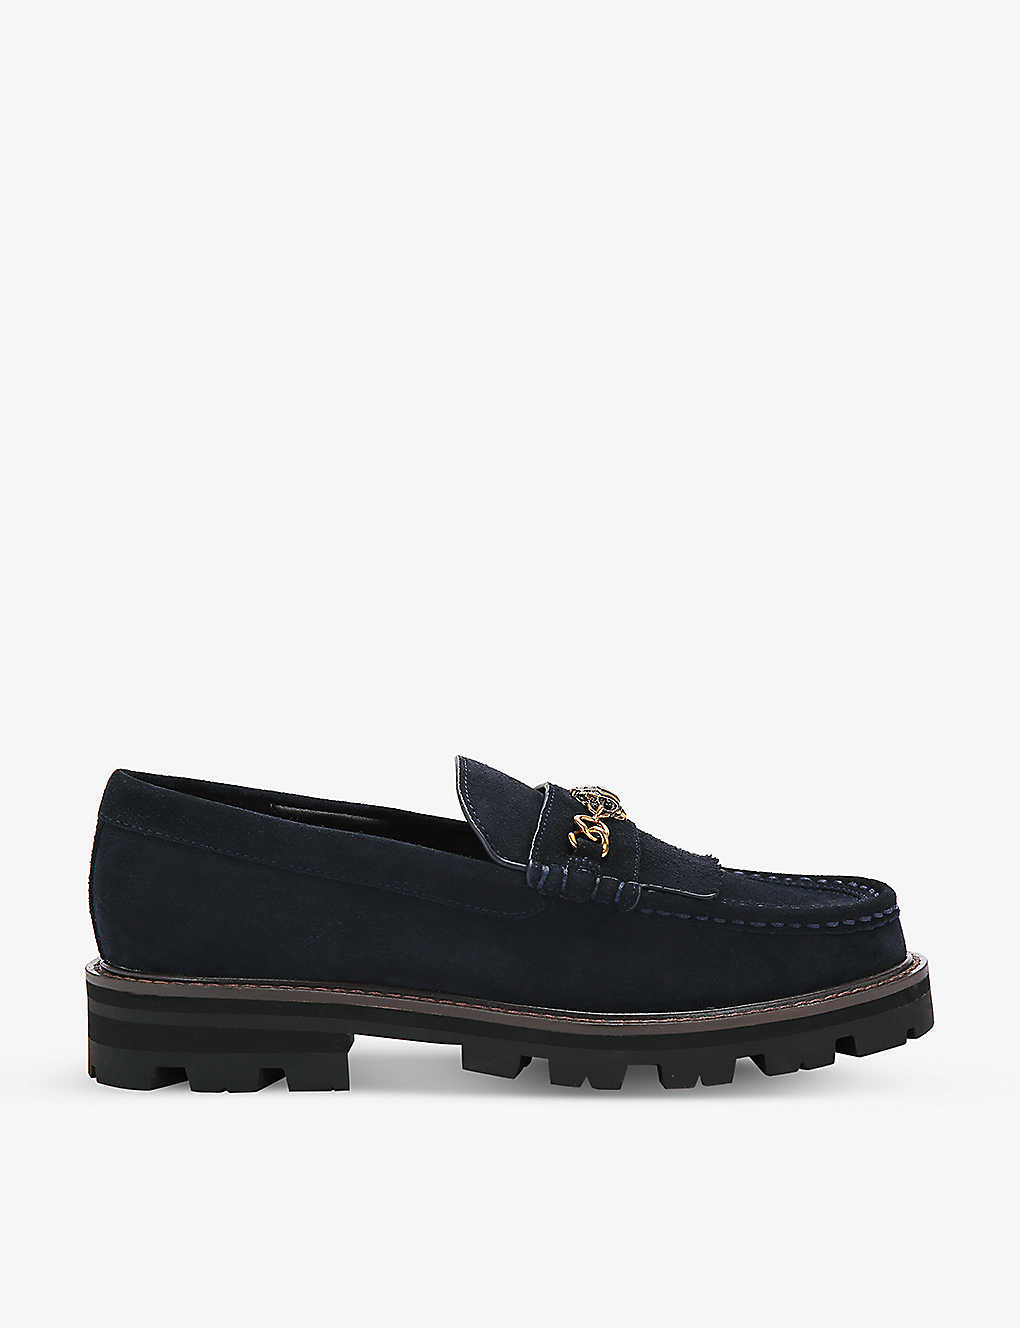 Kurt Geiger London Womens Navy Carnaby Eagle-head Embellished Suede Loafers